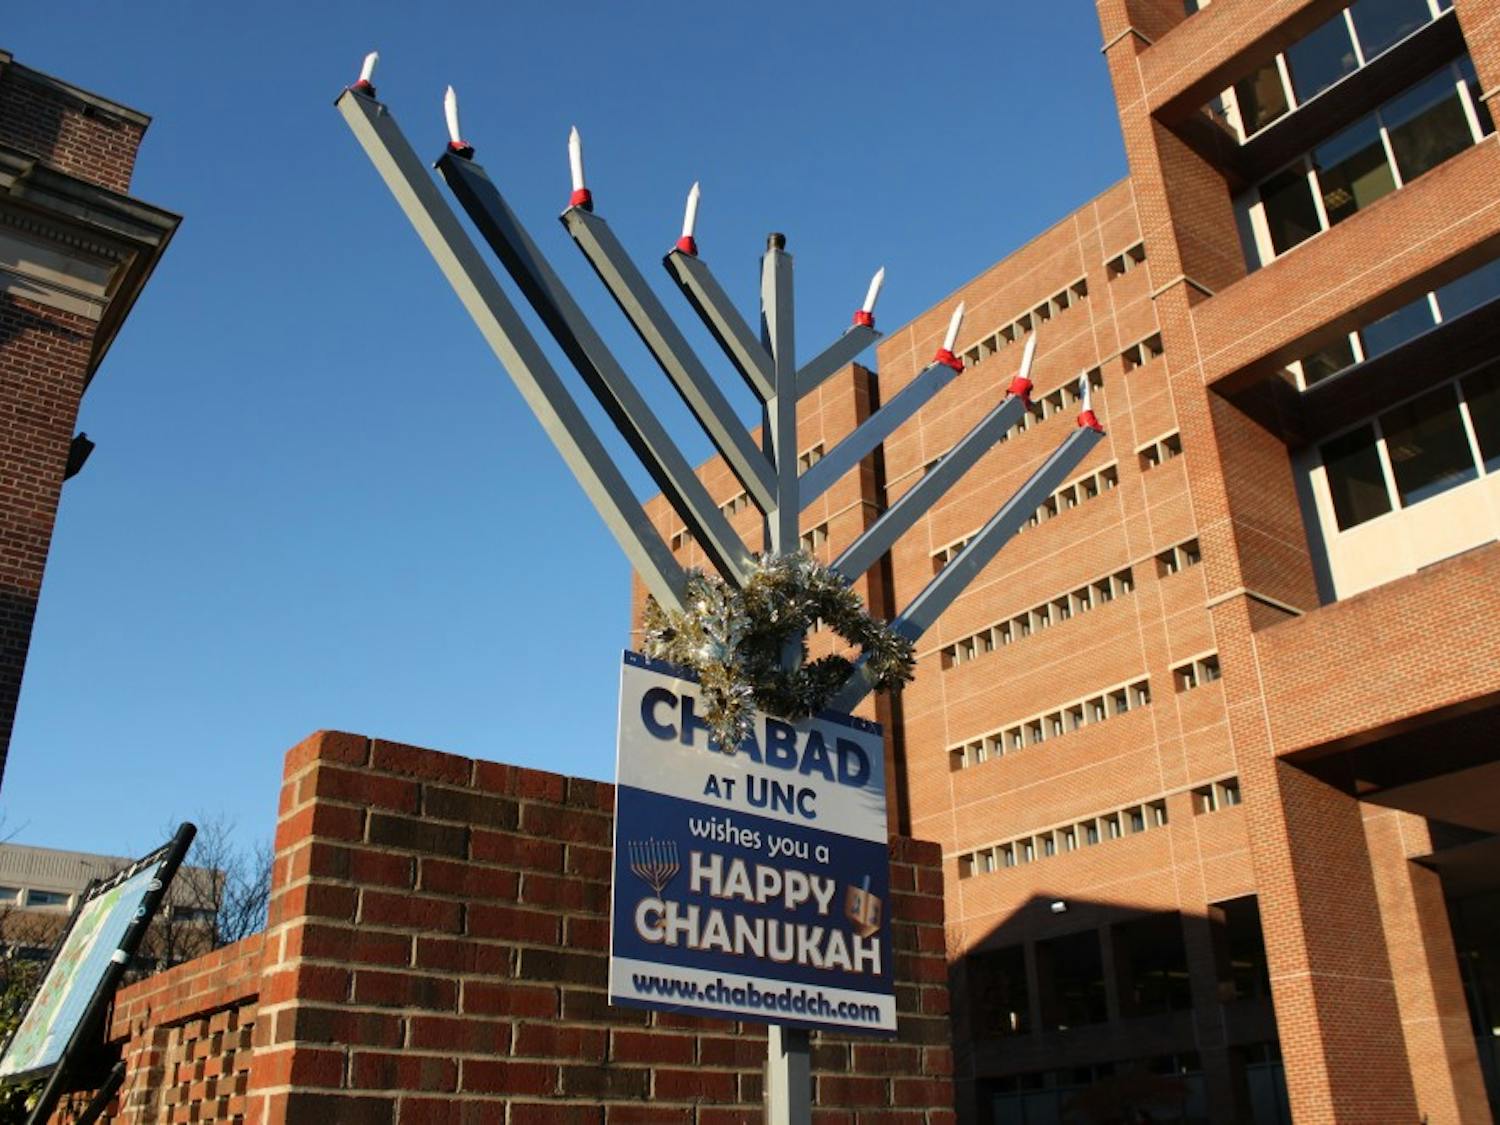 A menorah is placed outside the front of Lenoir Dining Hall by Chabad at UNC to celebrate Hanukkah, which begins on Sunday, Dec. 2, 2018 and ends Monday, Dec. 10, 2018. The menorah will be used at the menorah lighting in the Pit hosted by Chabad at UNC on Wednesday, Dec. 5, 2018.